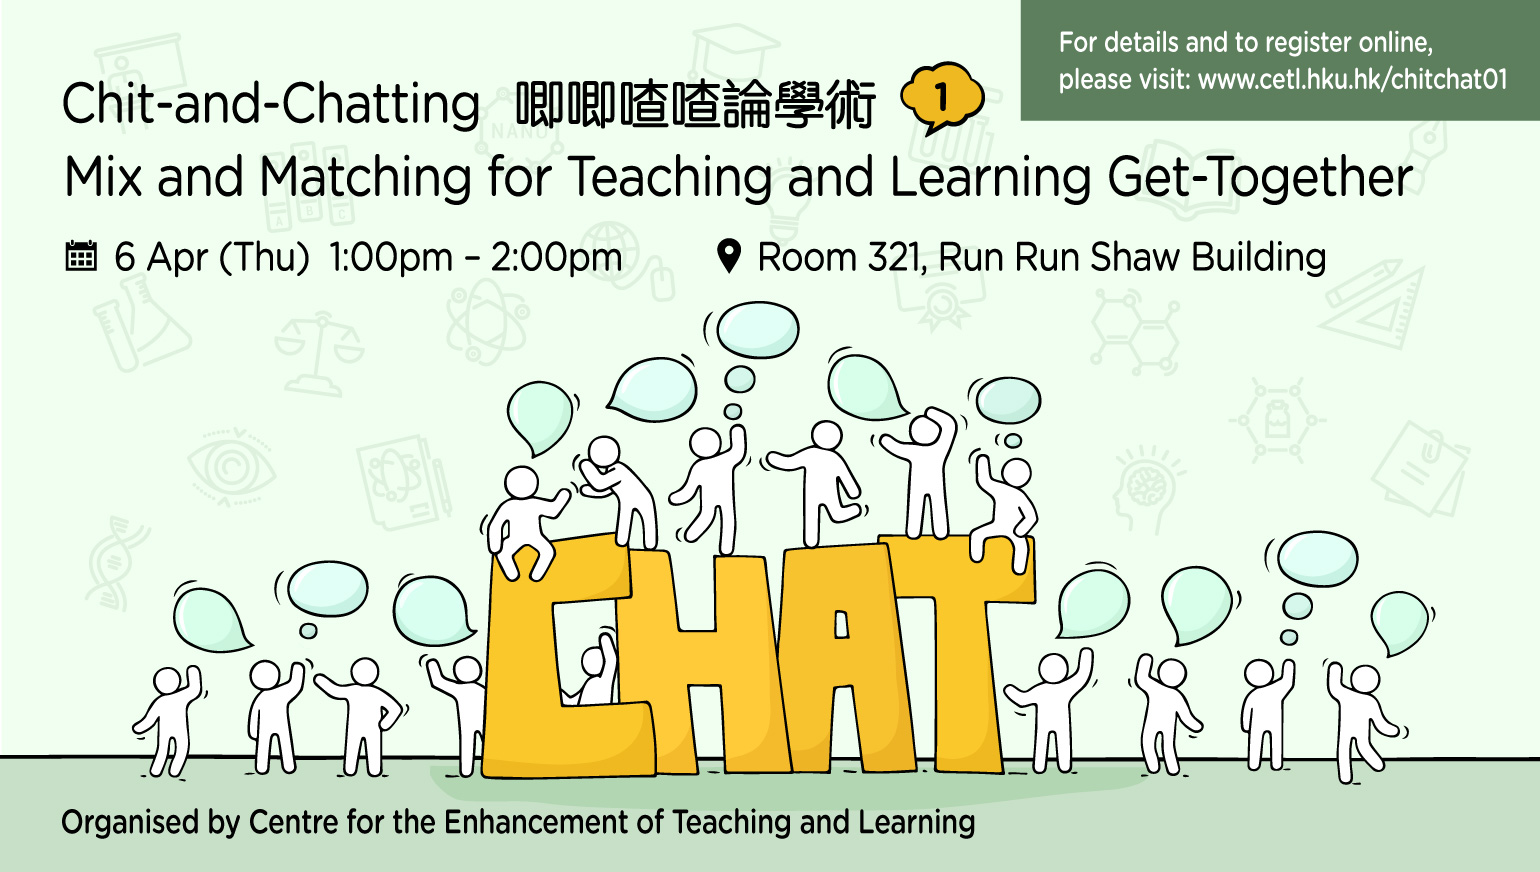 Chit-and-Chatting, Mix and Matching for Teaching and Learning Get-Together 唧唧喳喳論學術 (1)​